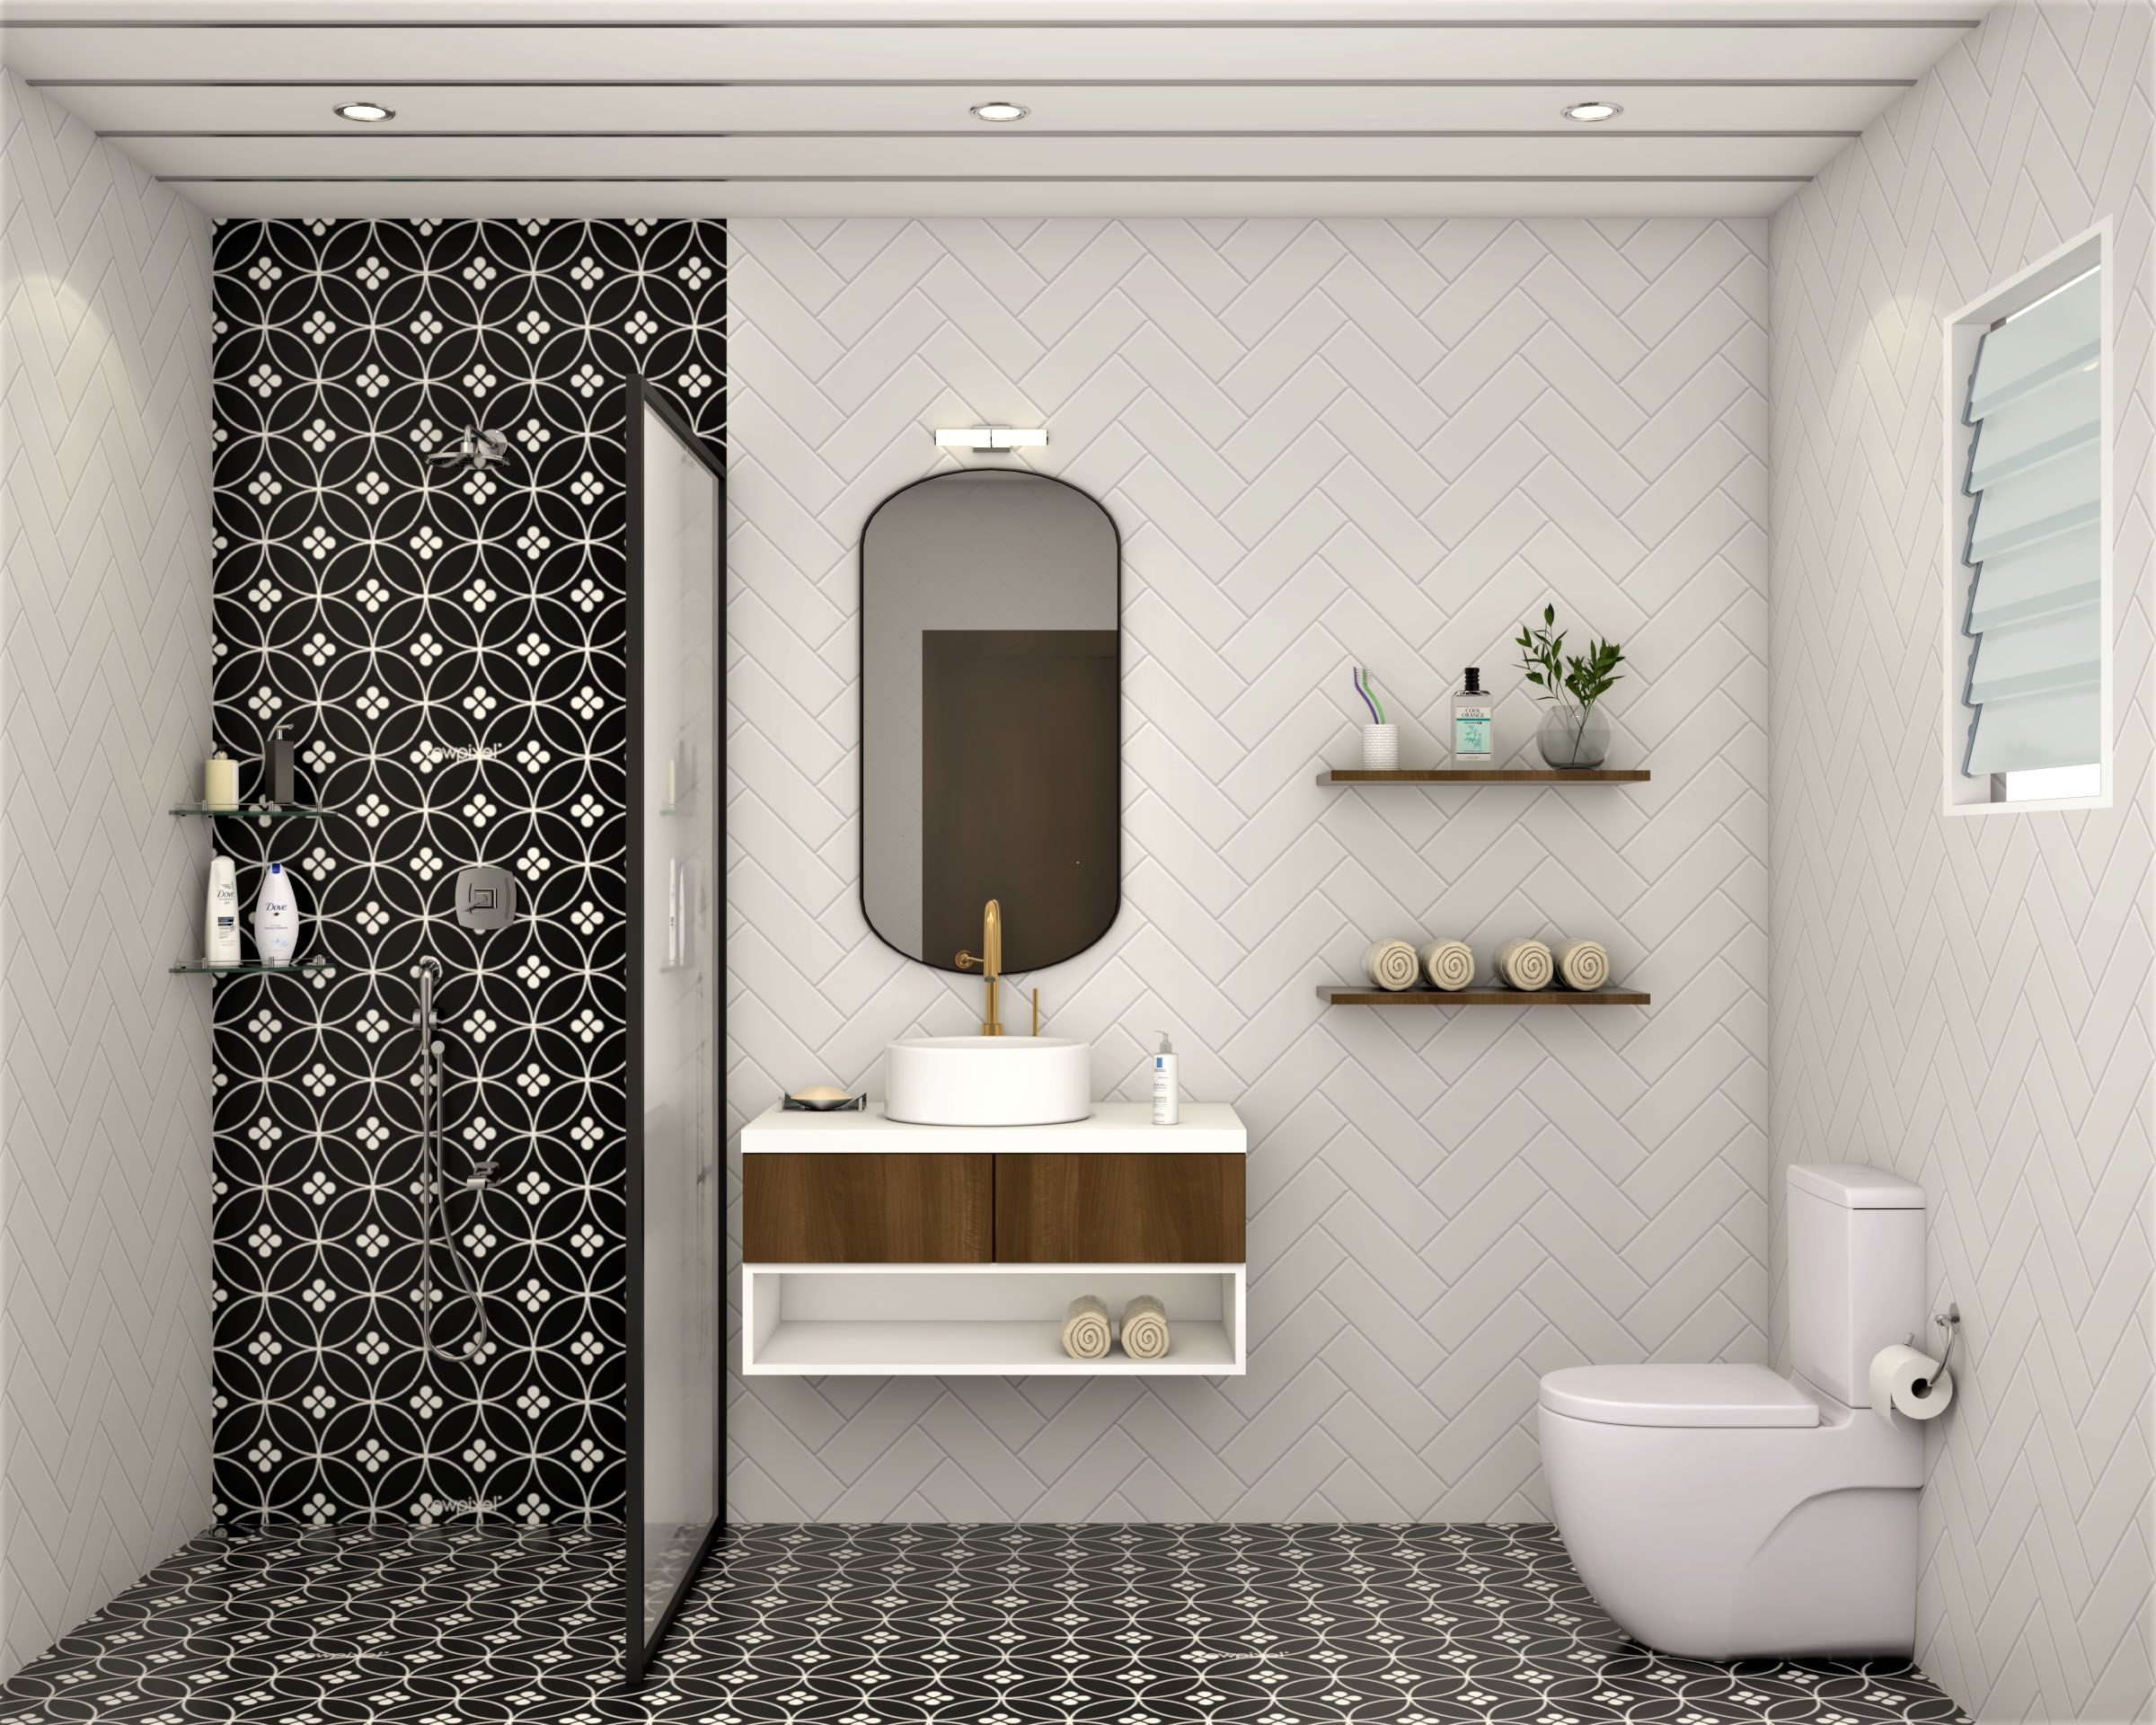 Contemporary Black And White Bathroom Tile Design With Circular And Herringbone Patterns